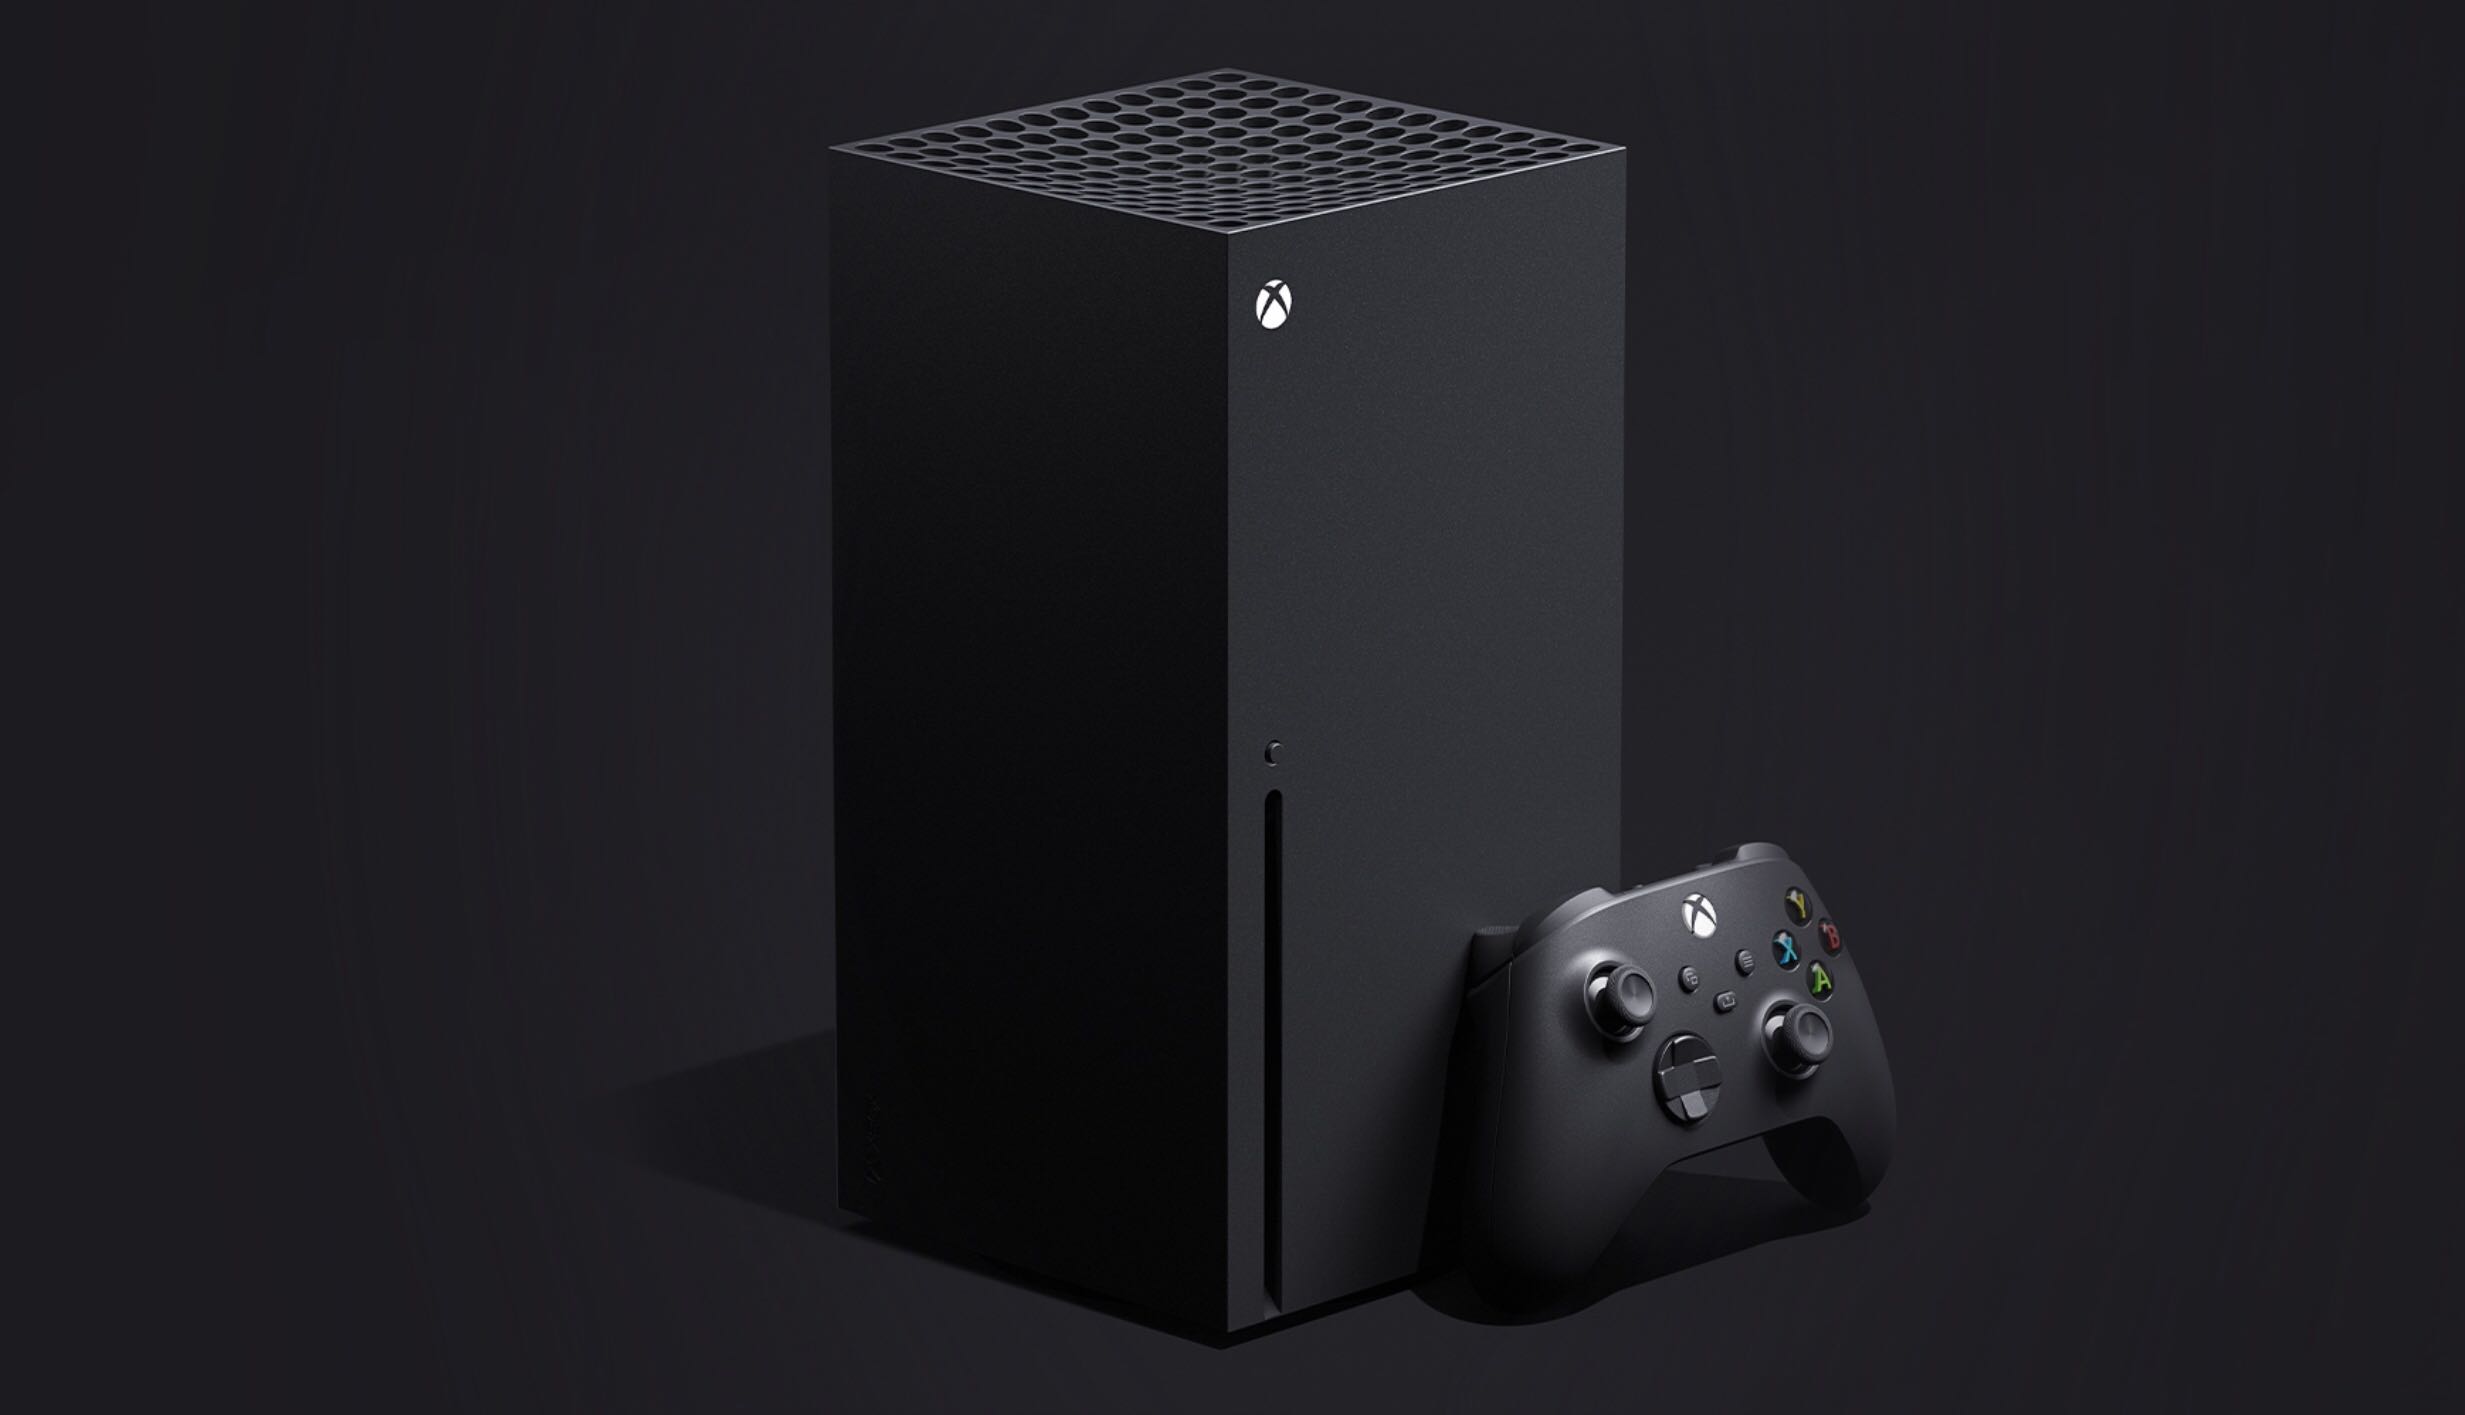 Microsoft's upcoming Xbox Series X will not only have more graphics power and a solid-state drive for faster loading but will also be backward compatible